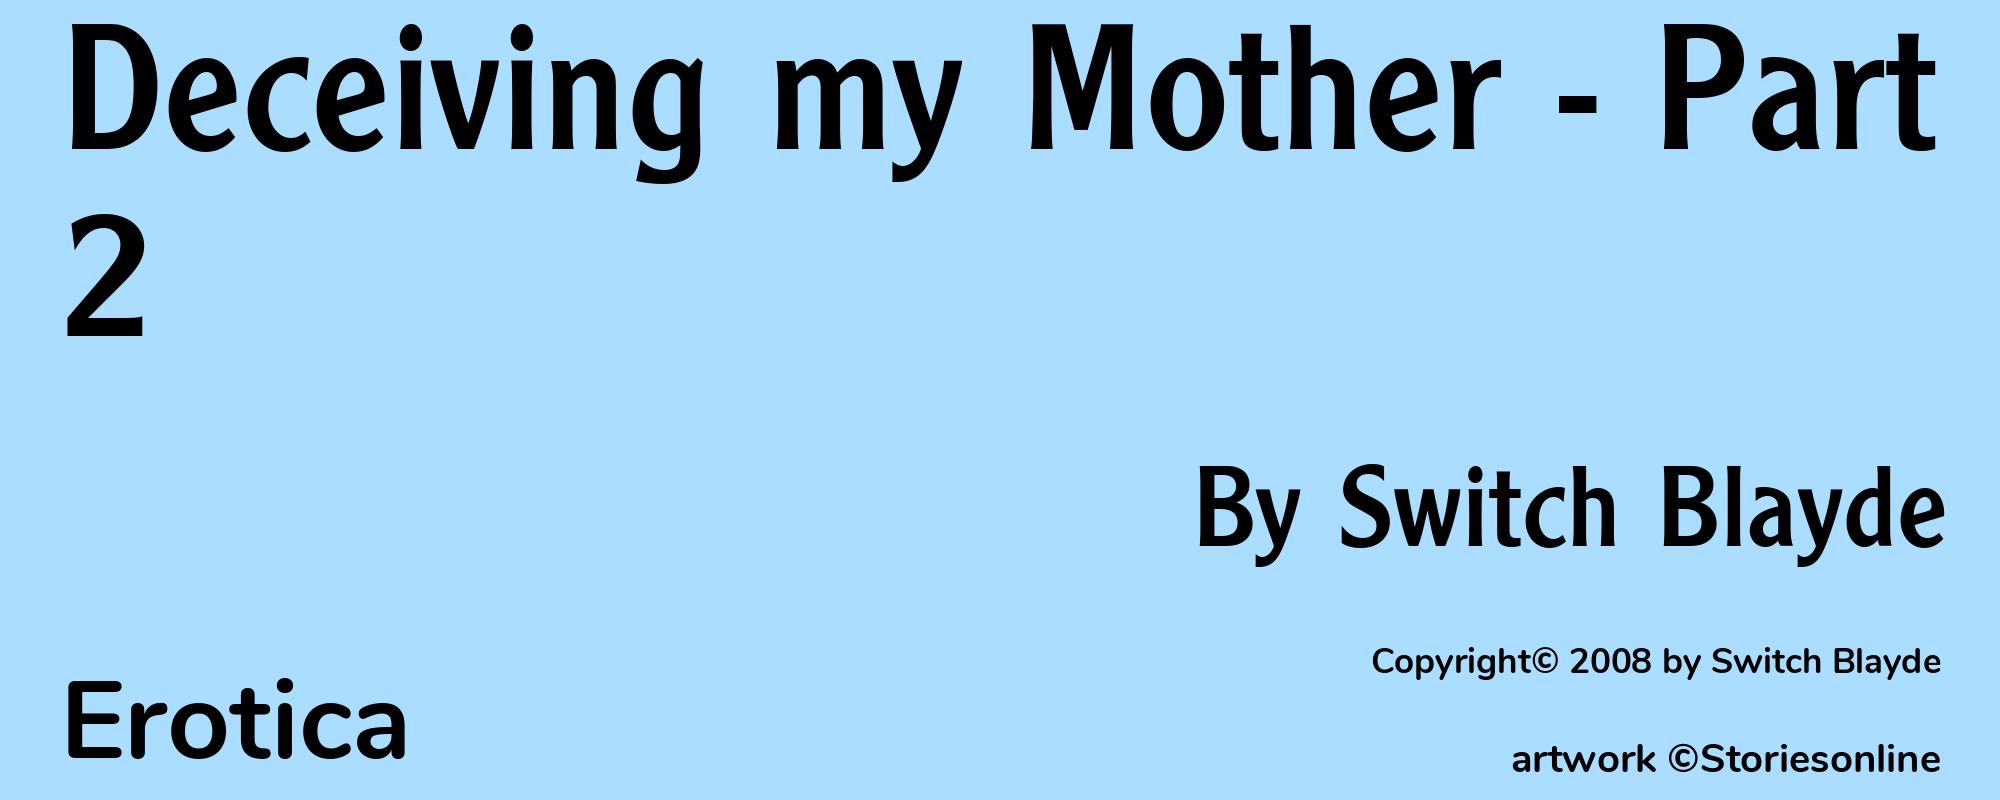 Deceiving my Mother - Part 2 - Cover